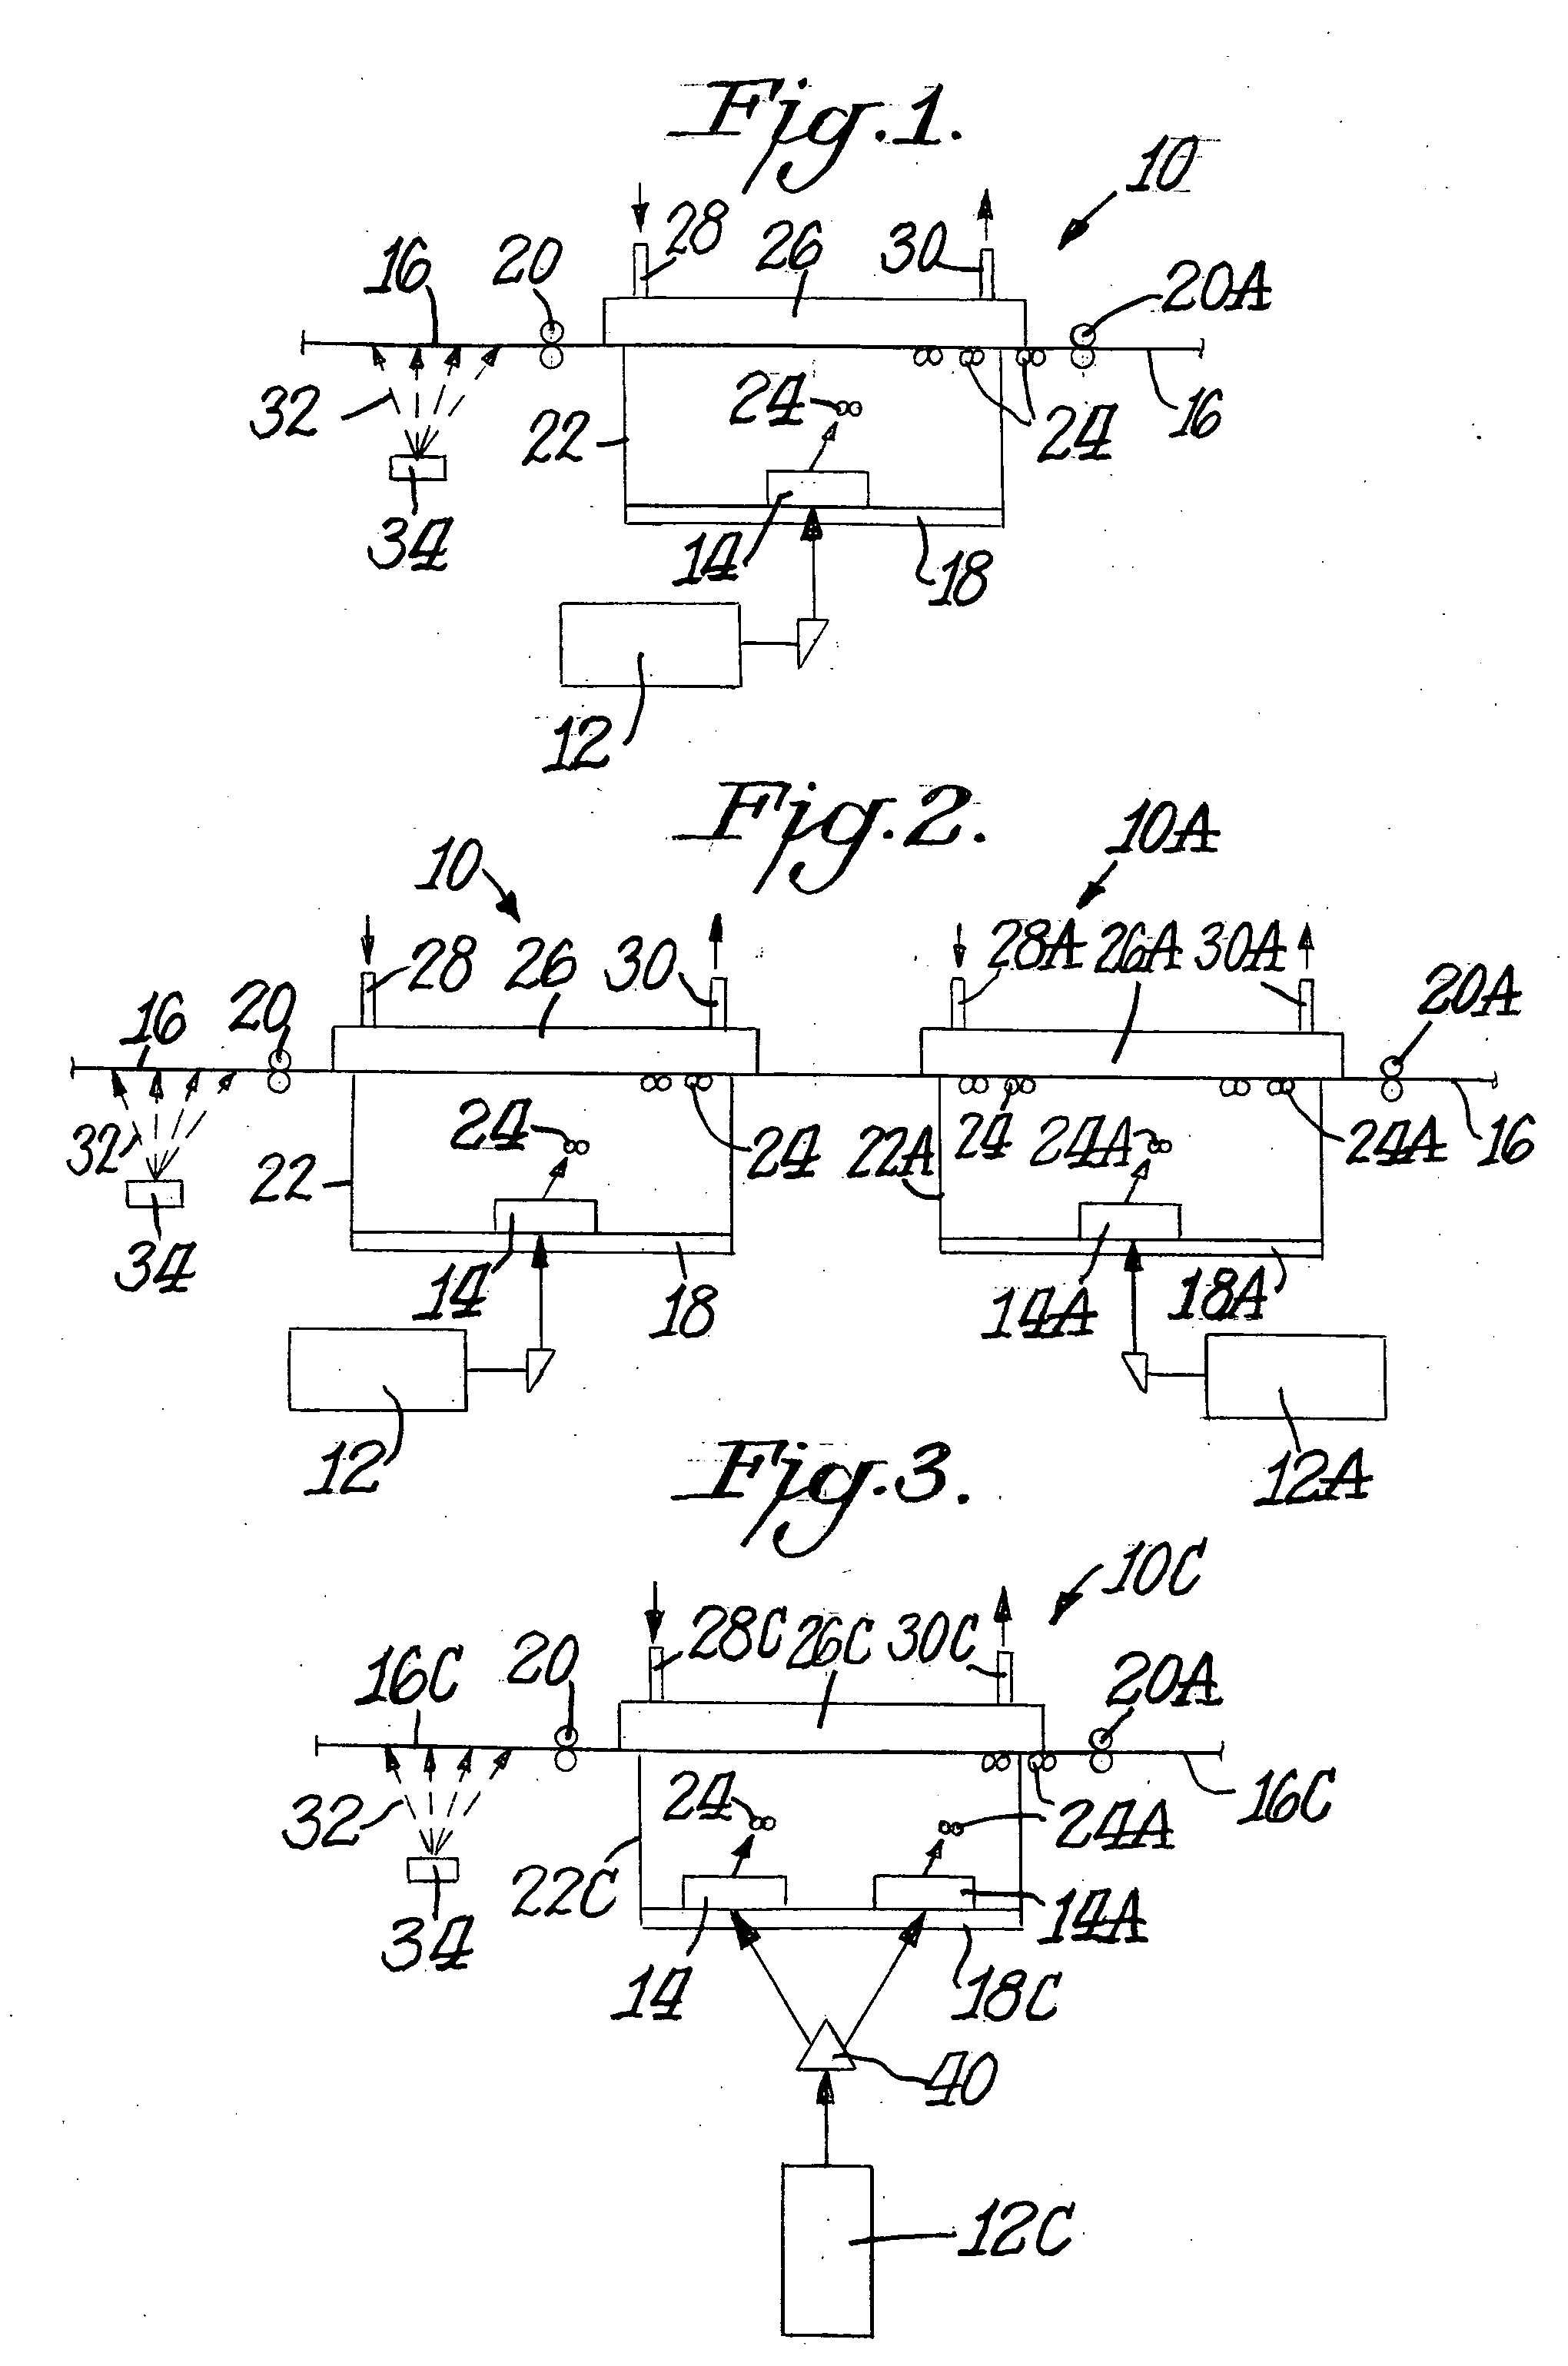 Continuous process for surface modification of filter materials